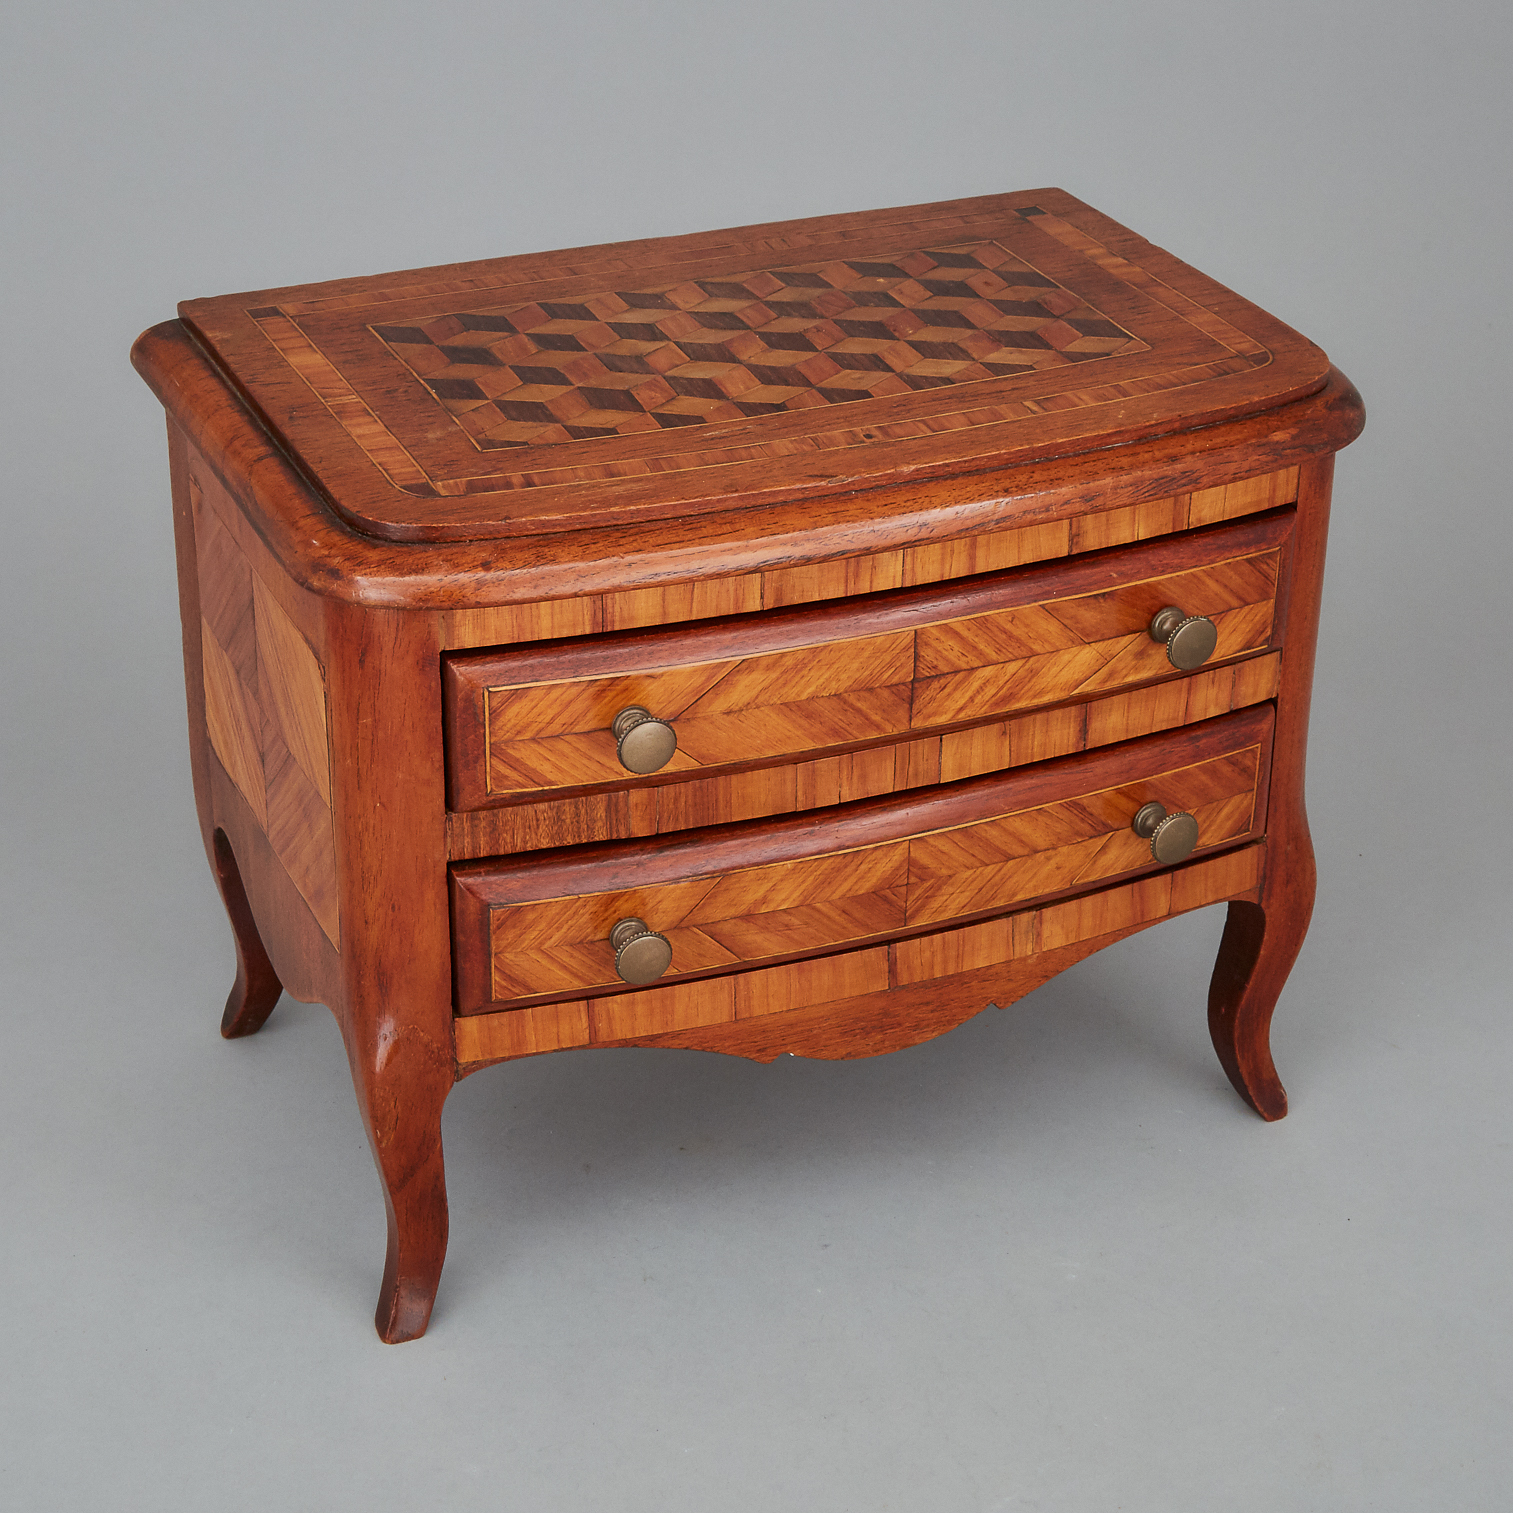 Miniature French Kingwood and Mixed Wood Parquetry Commode, 19th century